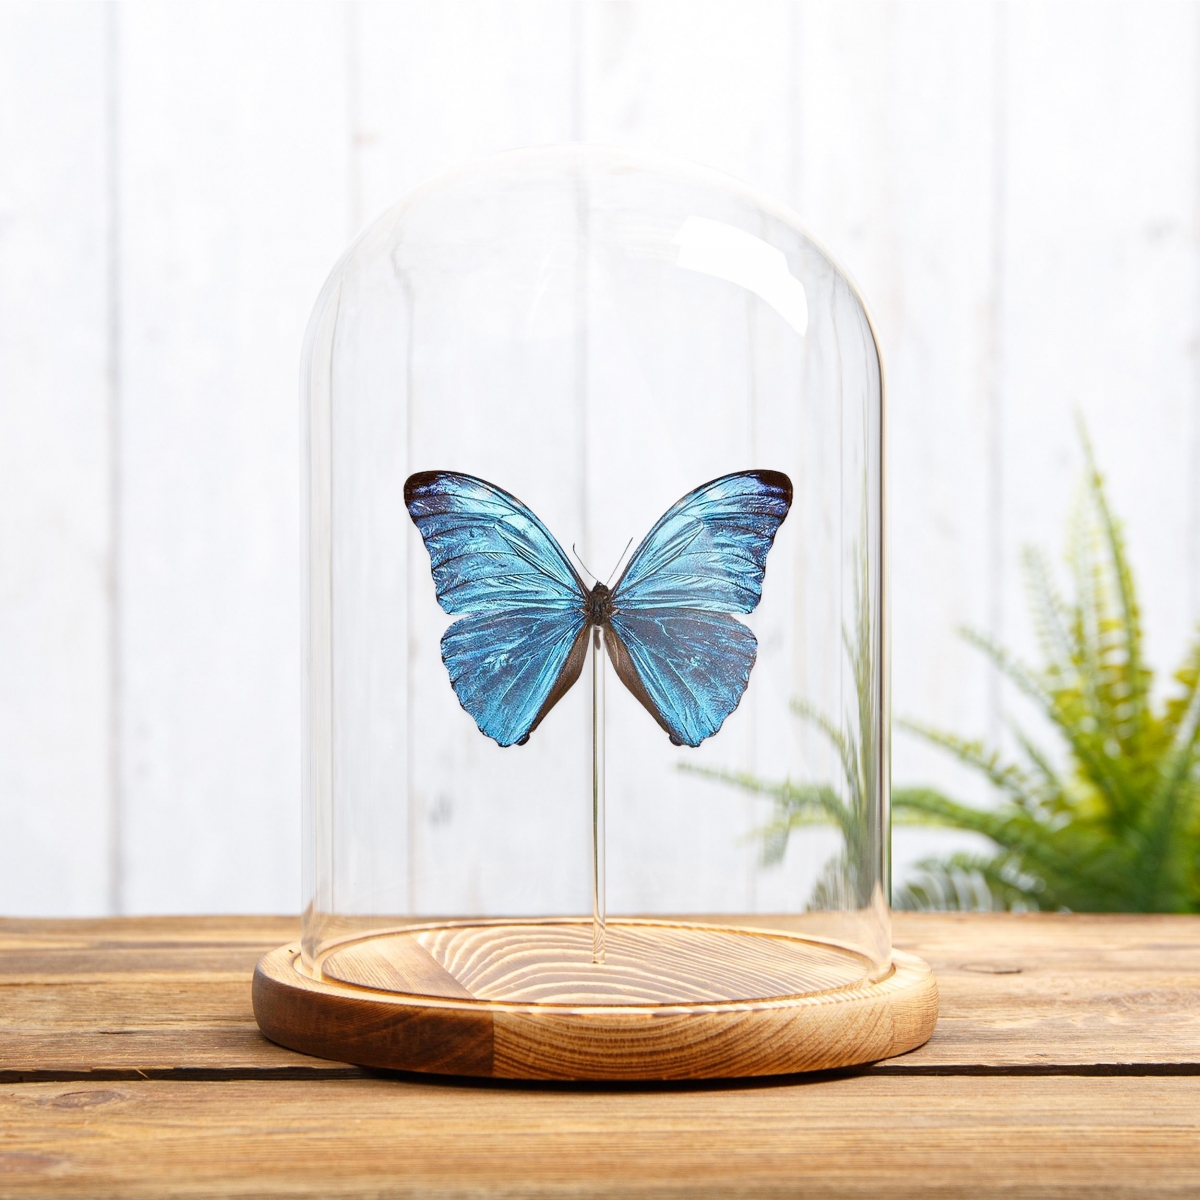 Morpho uraneis in Glass Dome with Wooden Base From Brazil